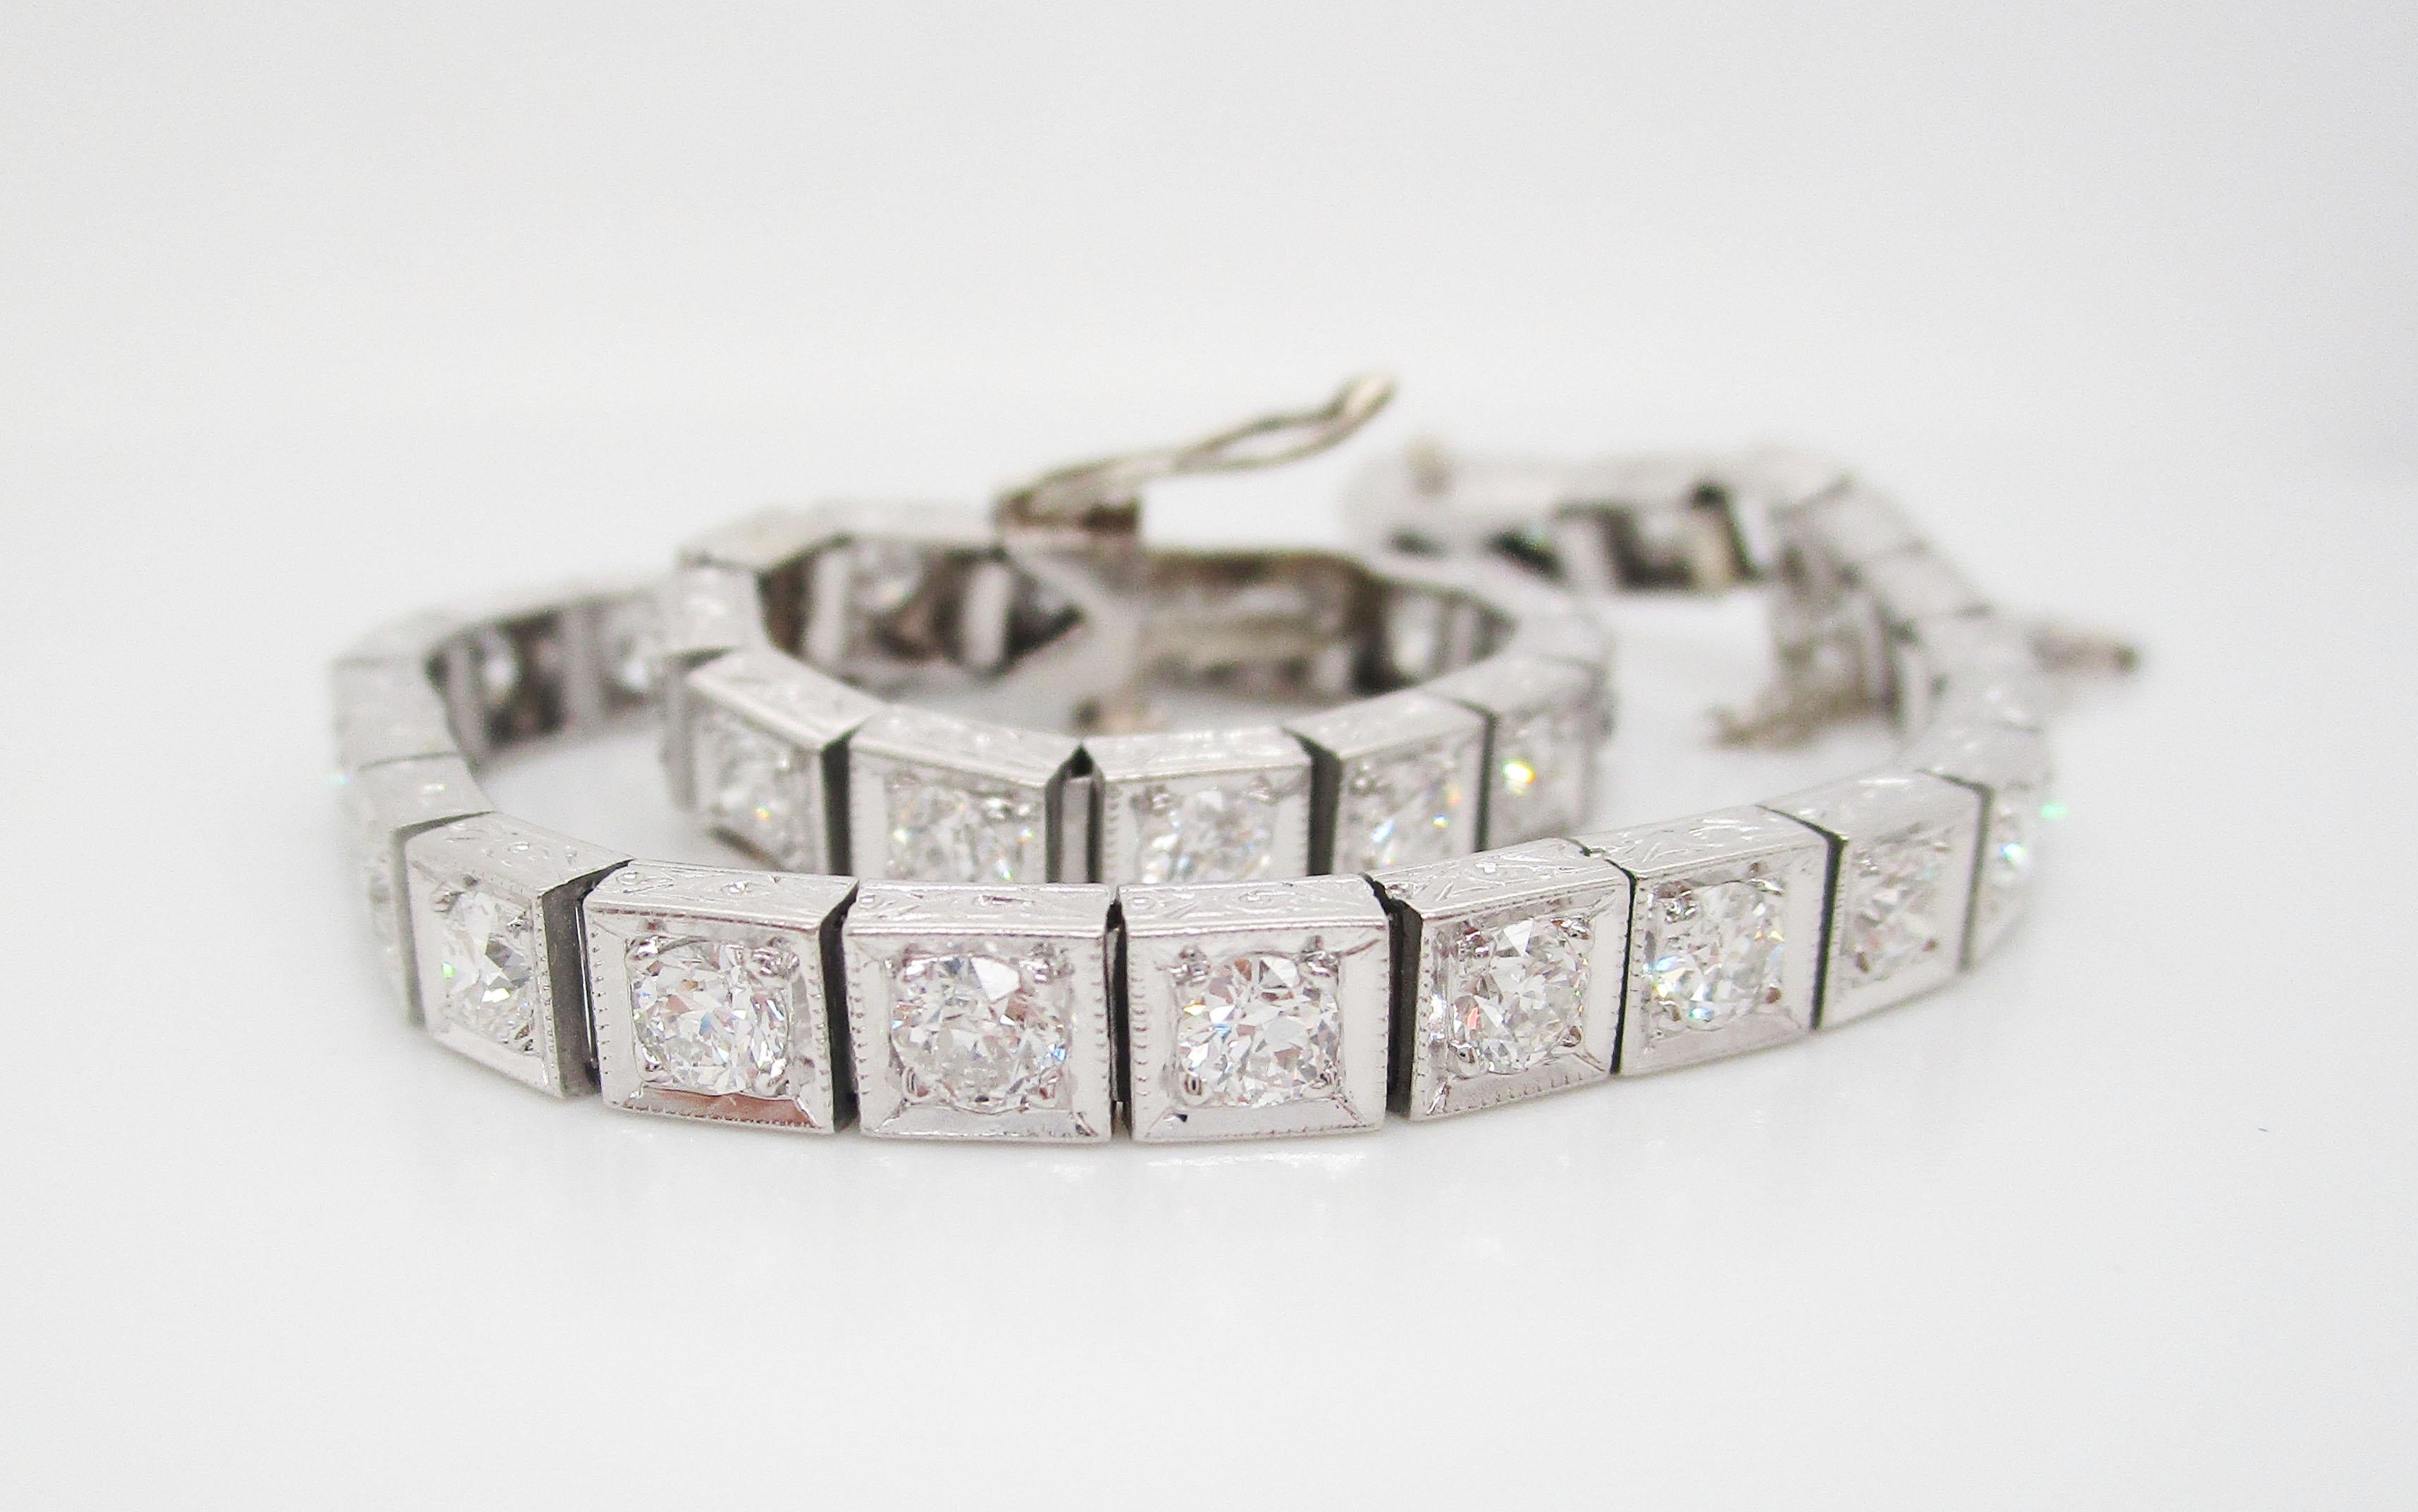 If you are looking for breathtaking, look no further than this all-original Art Deco bracelet in platinum with a gorgeous array of euro cut diamonds. The sleek line design of the bracelet means it is easy to wear and goes with everything, but the